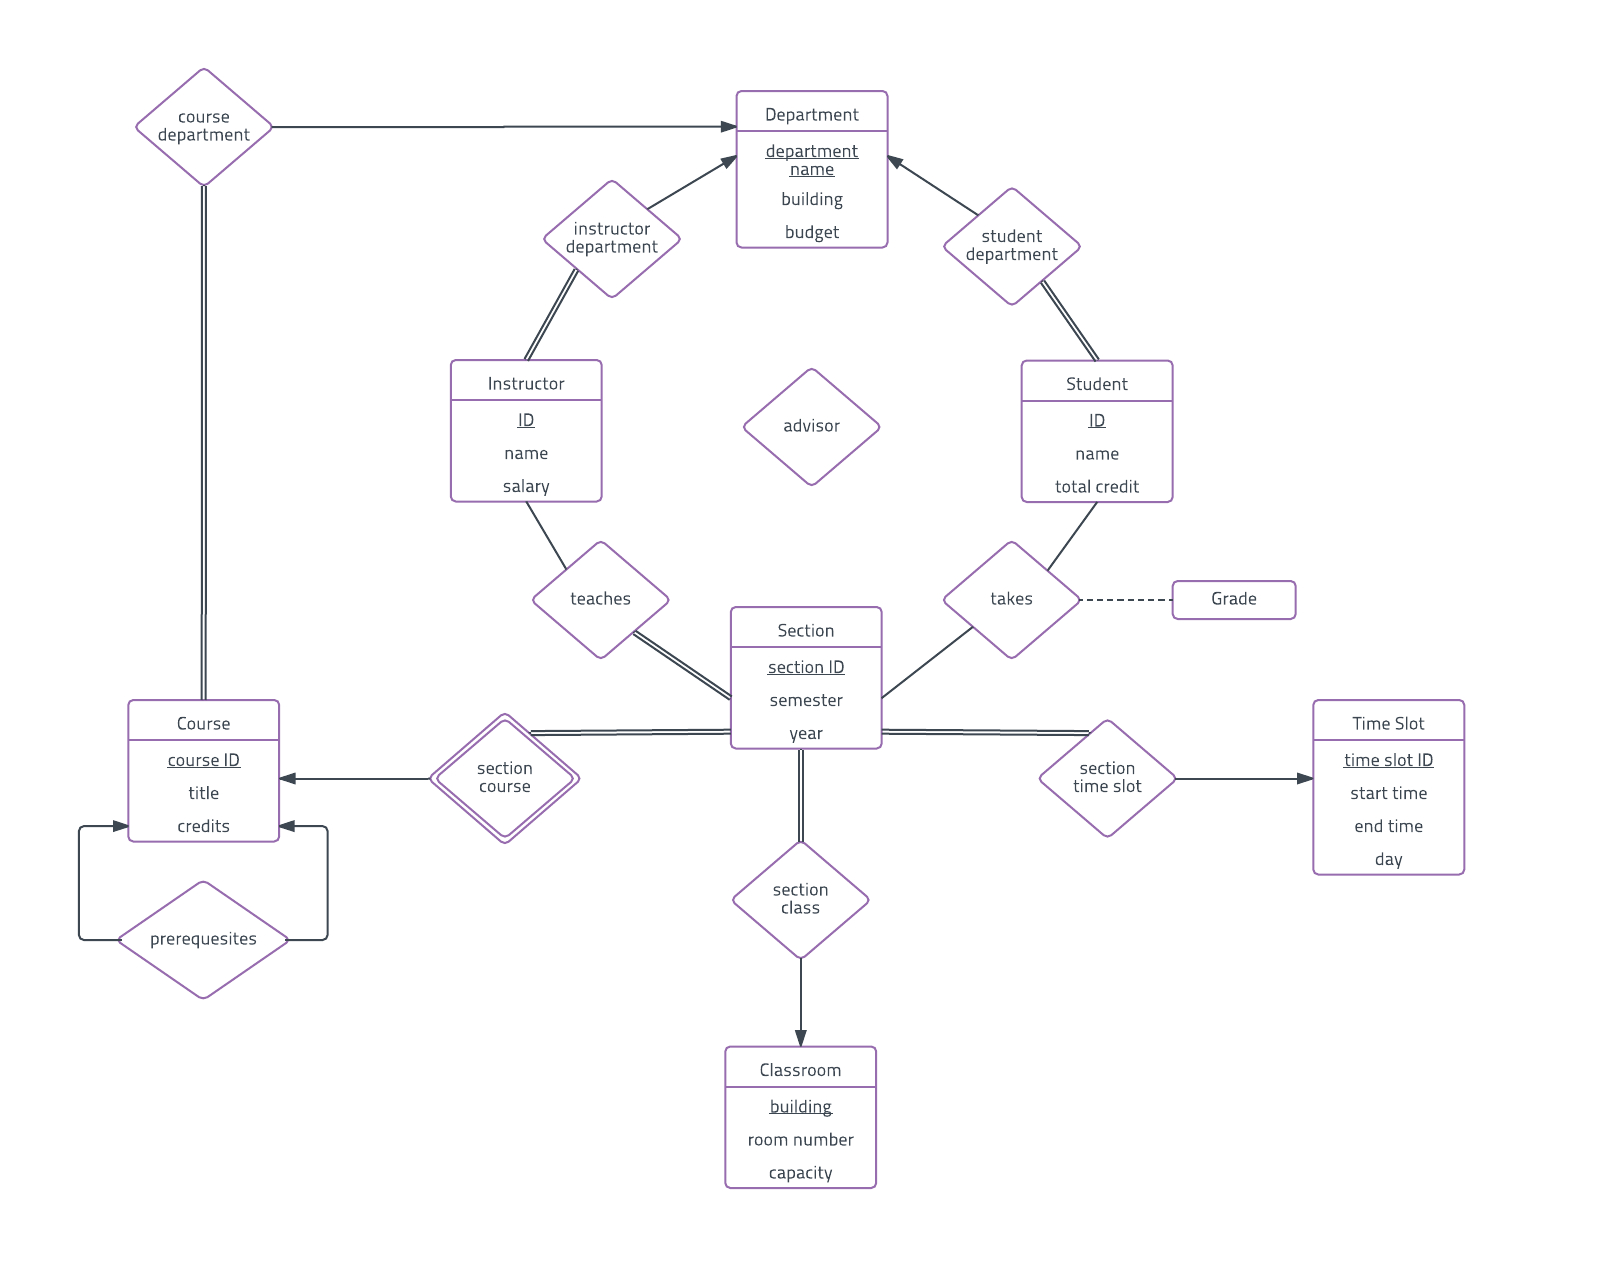 Er Diagram Examples And Templates | Lucidchart pertaining to Entity Relationship Er Diagram Examples